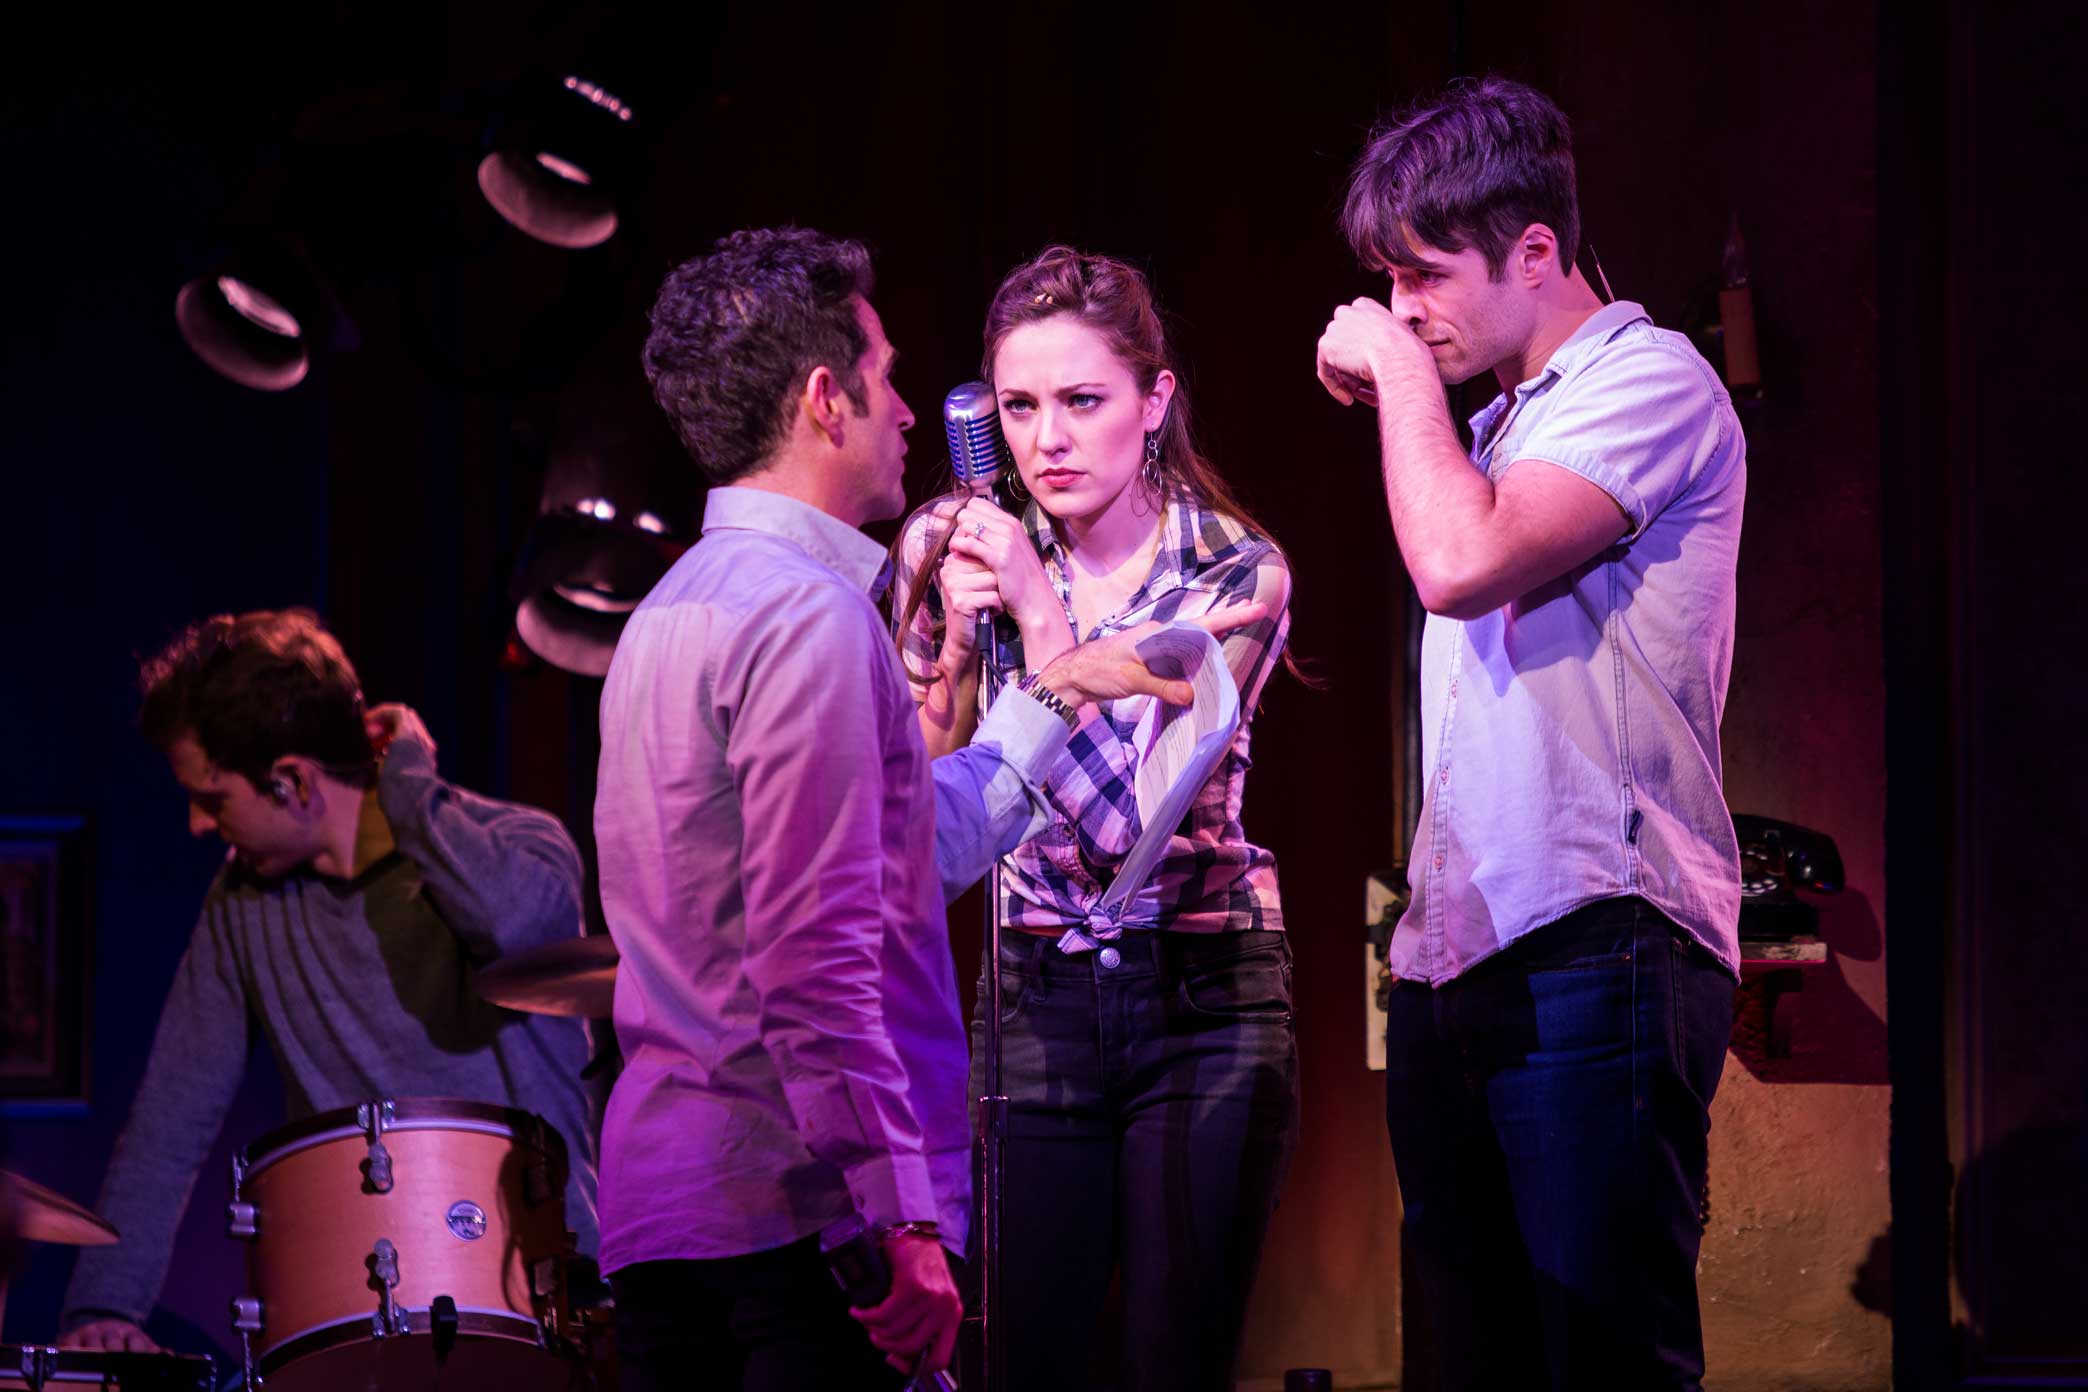  Mr. Blankenbuehler, left, with the actors Laura Osnes and Corey Cott.  2:05 p.m.&nbsp;Repeated calls of “Five, six, seven, eight” echoed throughout the theater as Mr. Blankenbuehler figured out the right way to properly light Ms. Osnes and Mr. Cott 